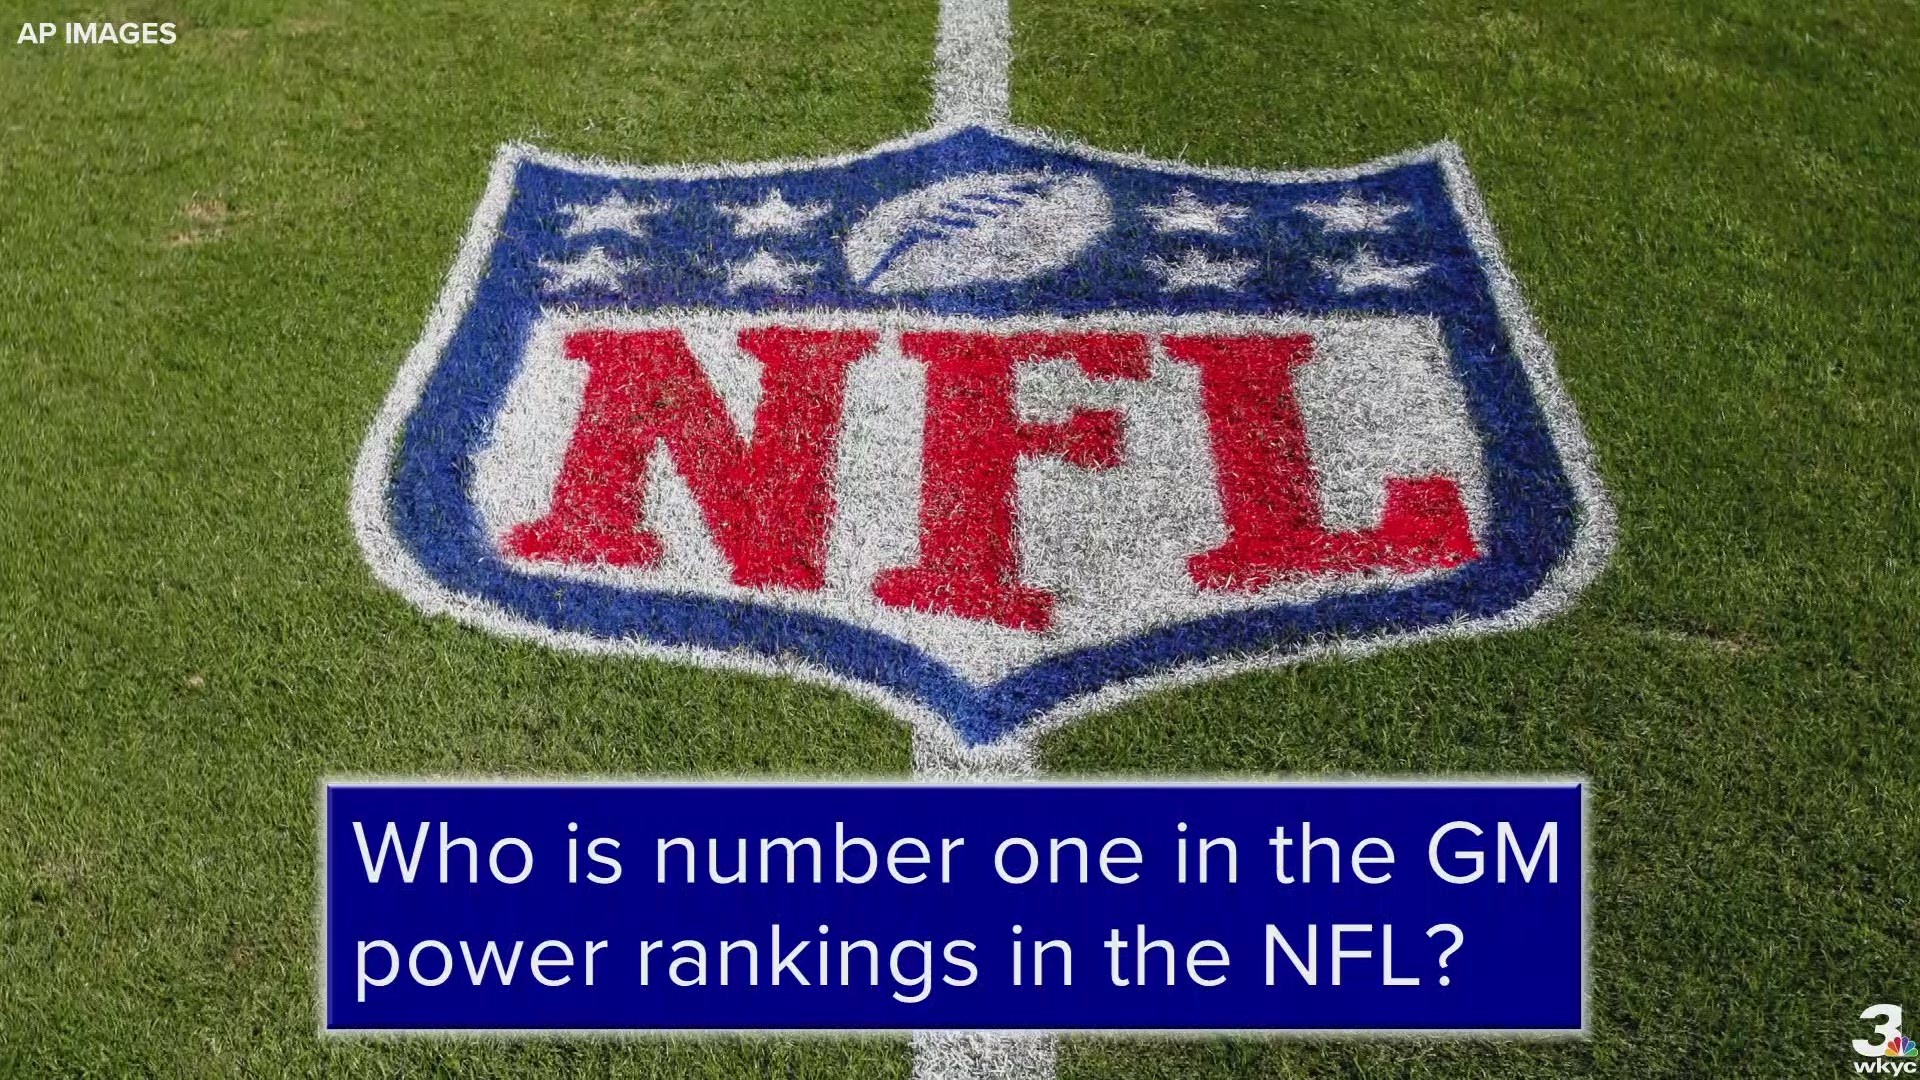 In his power ranking of the league's general managers, NFL.com's Gregg Rosenthal placed Cleveland Browns' GM John Dorsey at No. 4.